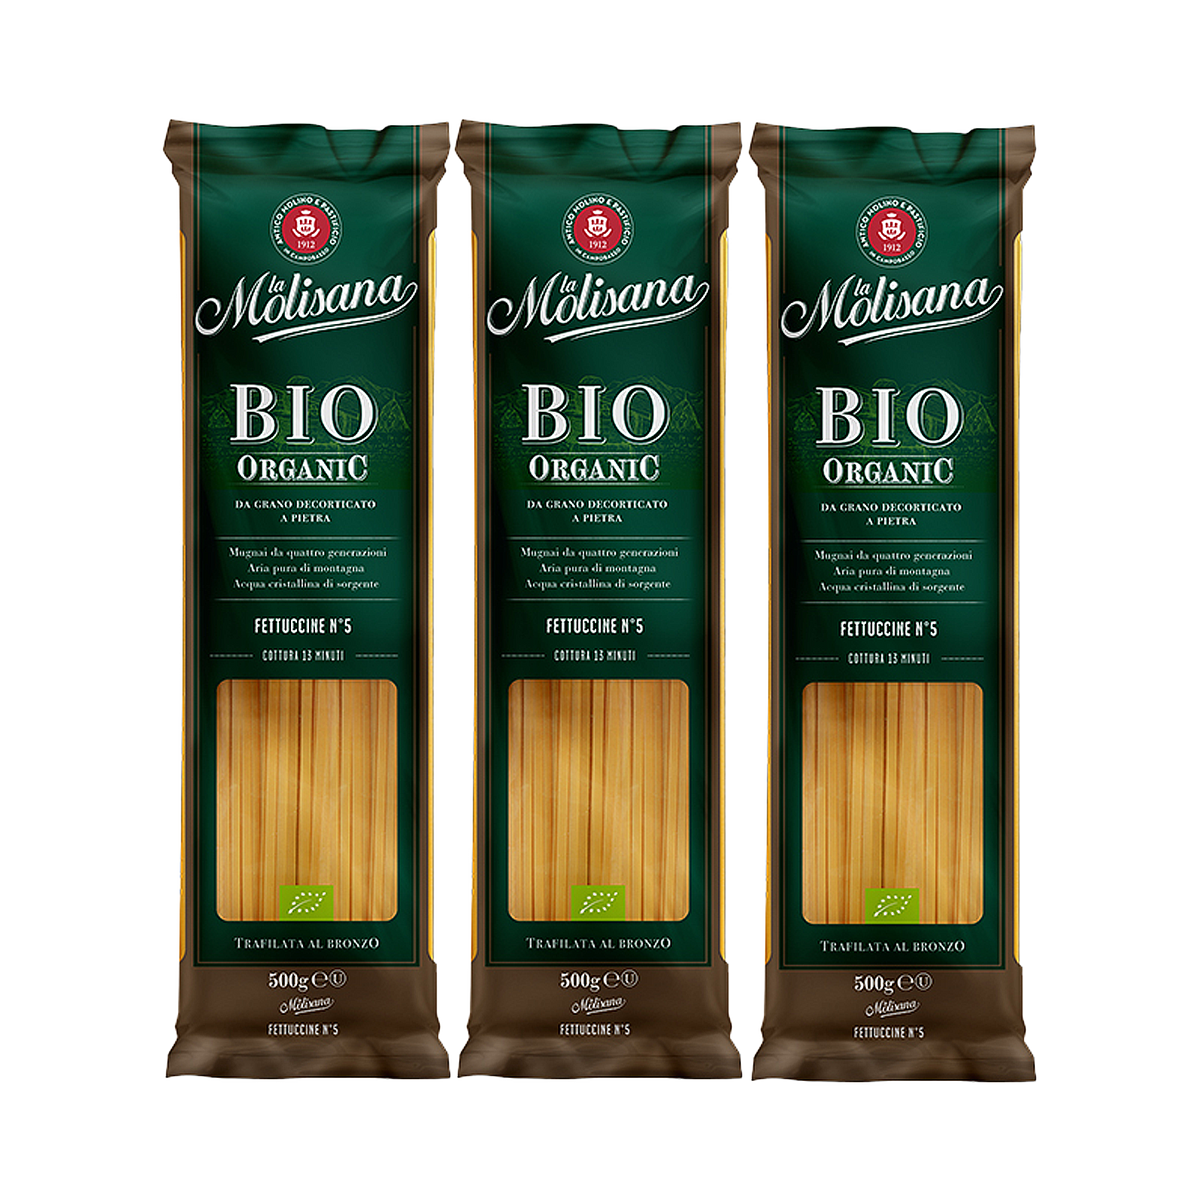 Certified Organic Fettuccine Pasta from Italy (500g x 3) - Horizon Farms